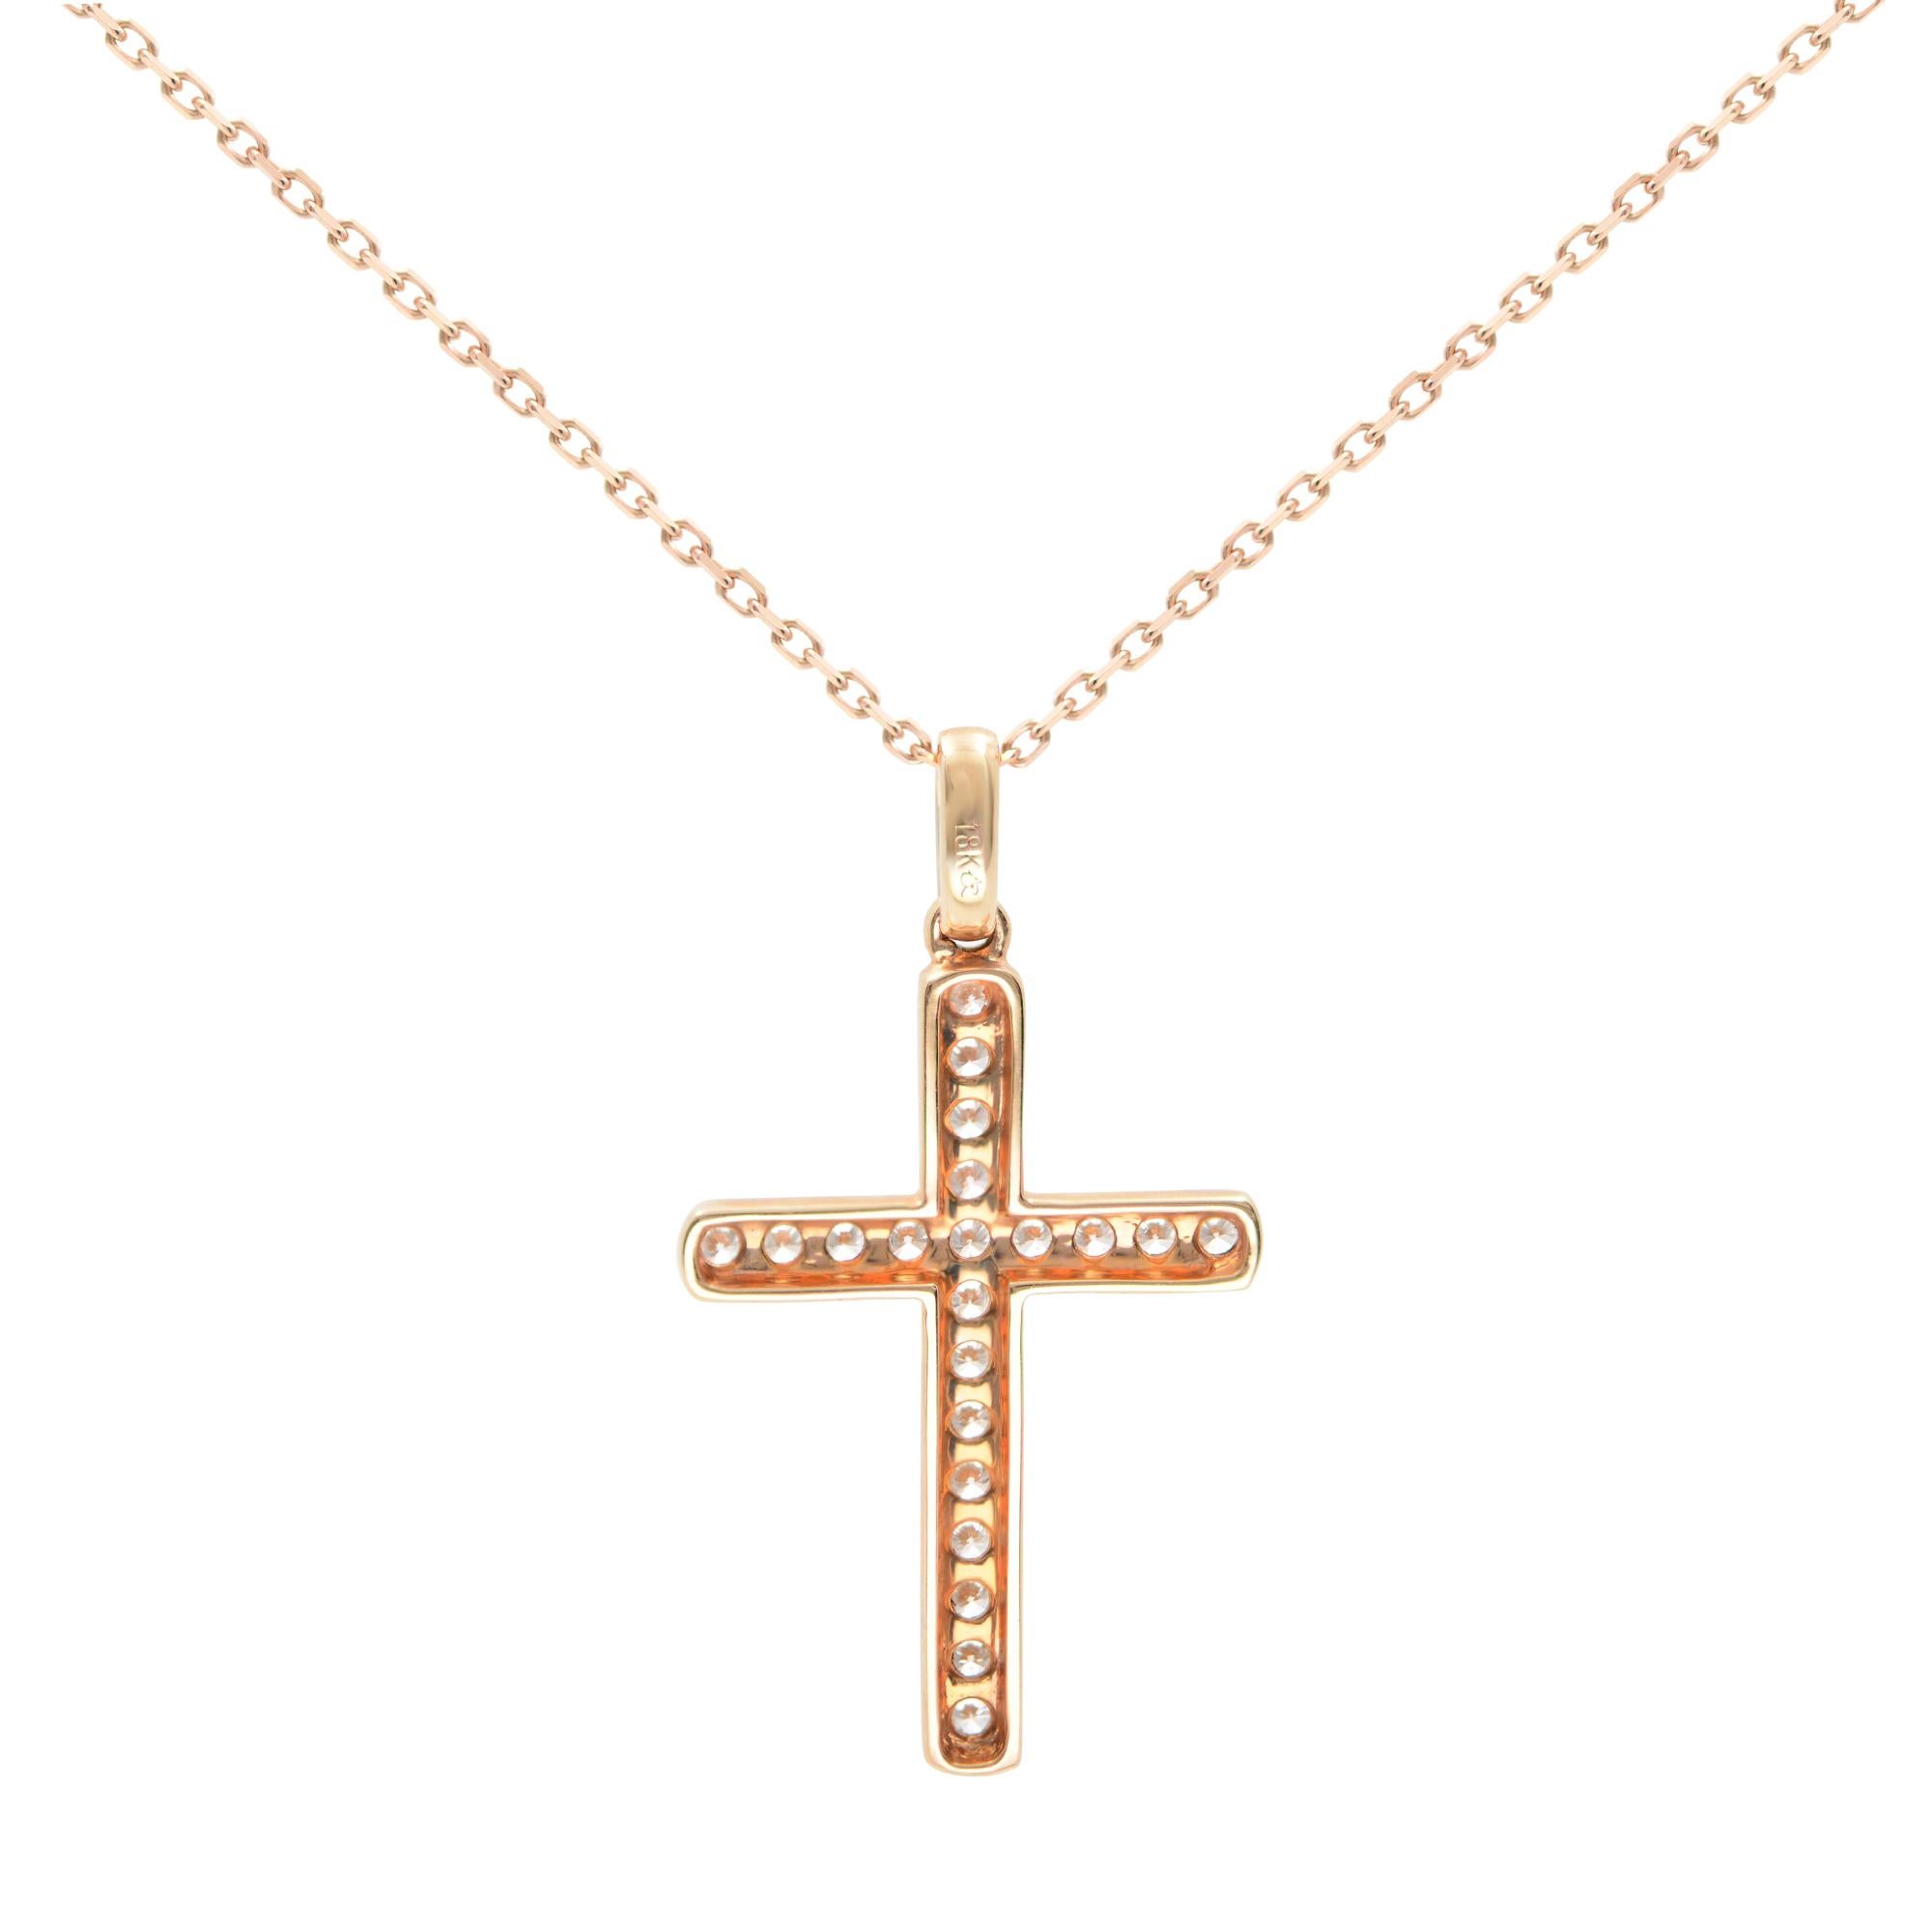 A gorgeous and modern diamond 0.8cttw cross pendant. Includes 20 brilliant round cut diamonds. Diamond color G-H Color and SI Clarity. The diamonds are beautifully set in a unique pave setting. Crafted in 18K Rose Gold. Pendant size:  30x16mm.